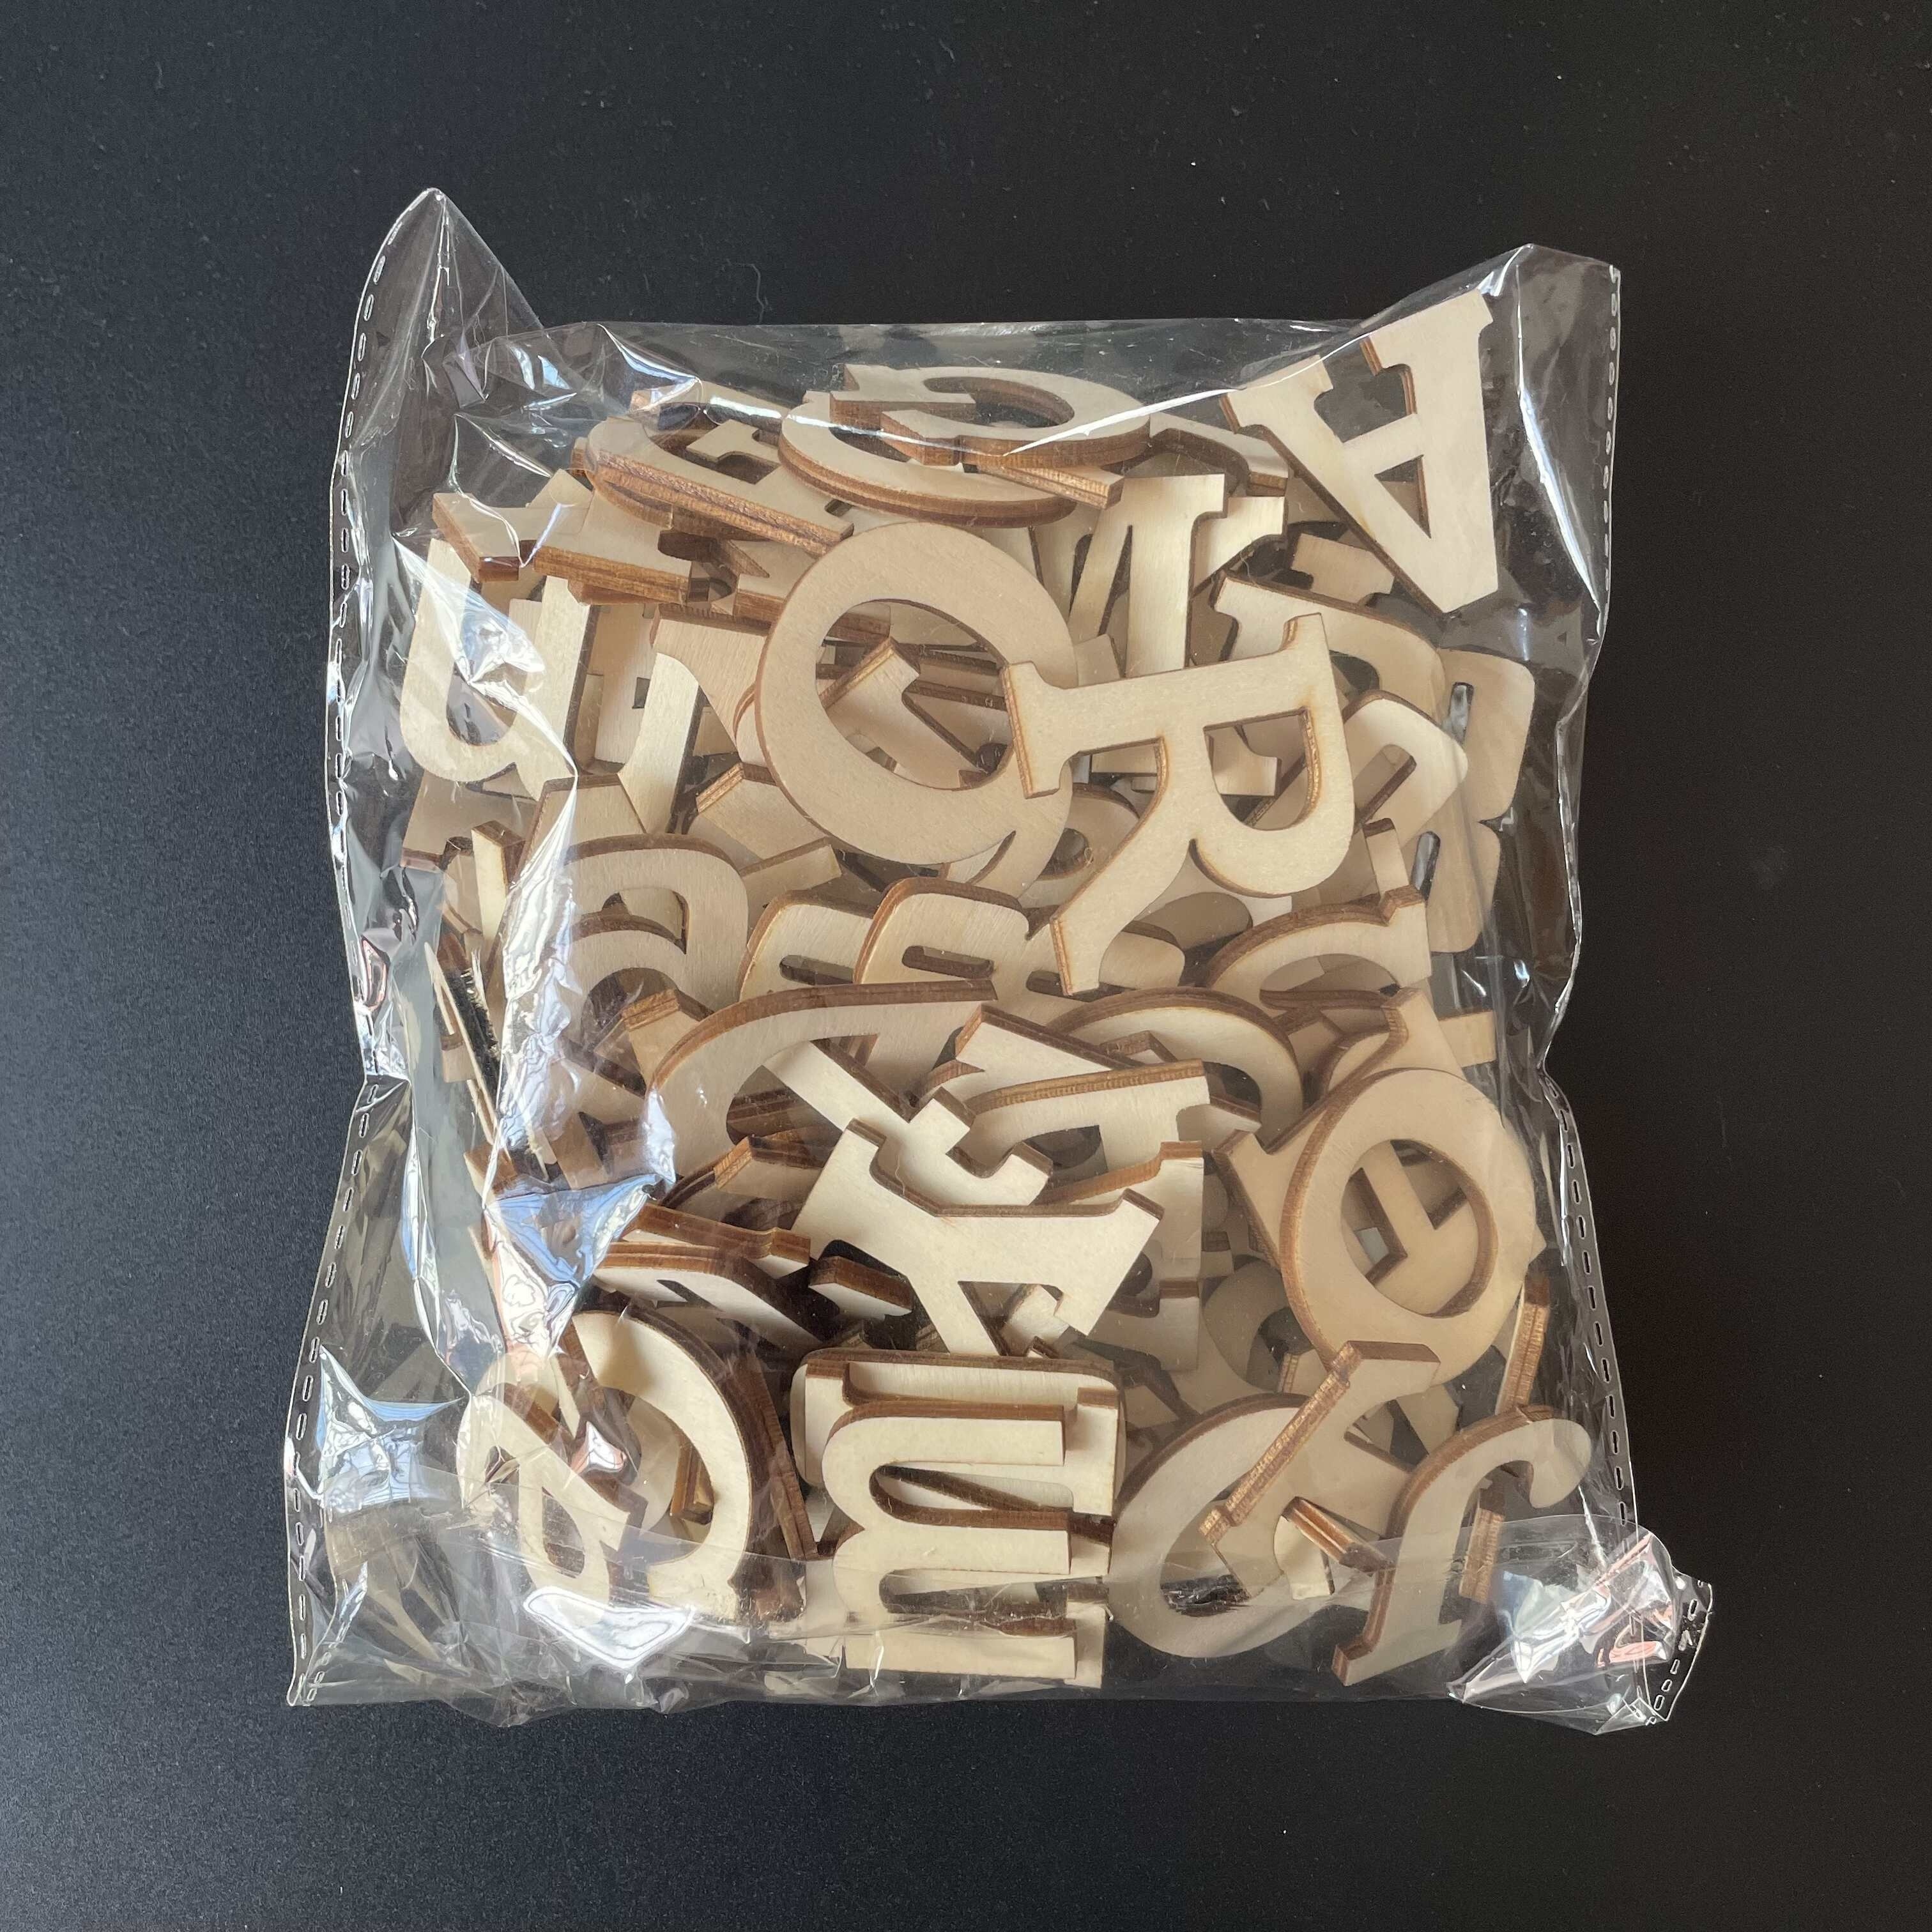 124 Pcs Wooden Letters 2 Inch for Crafts Unfinished Capital Wooden